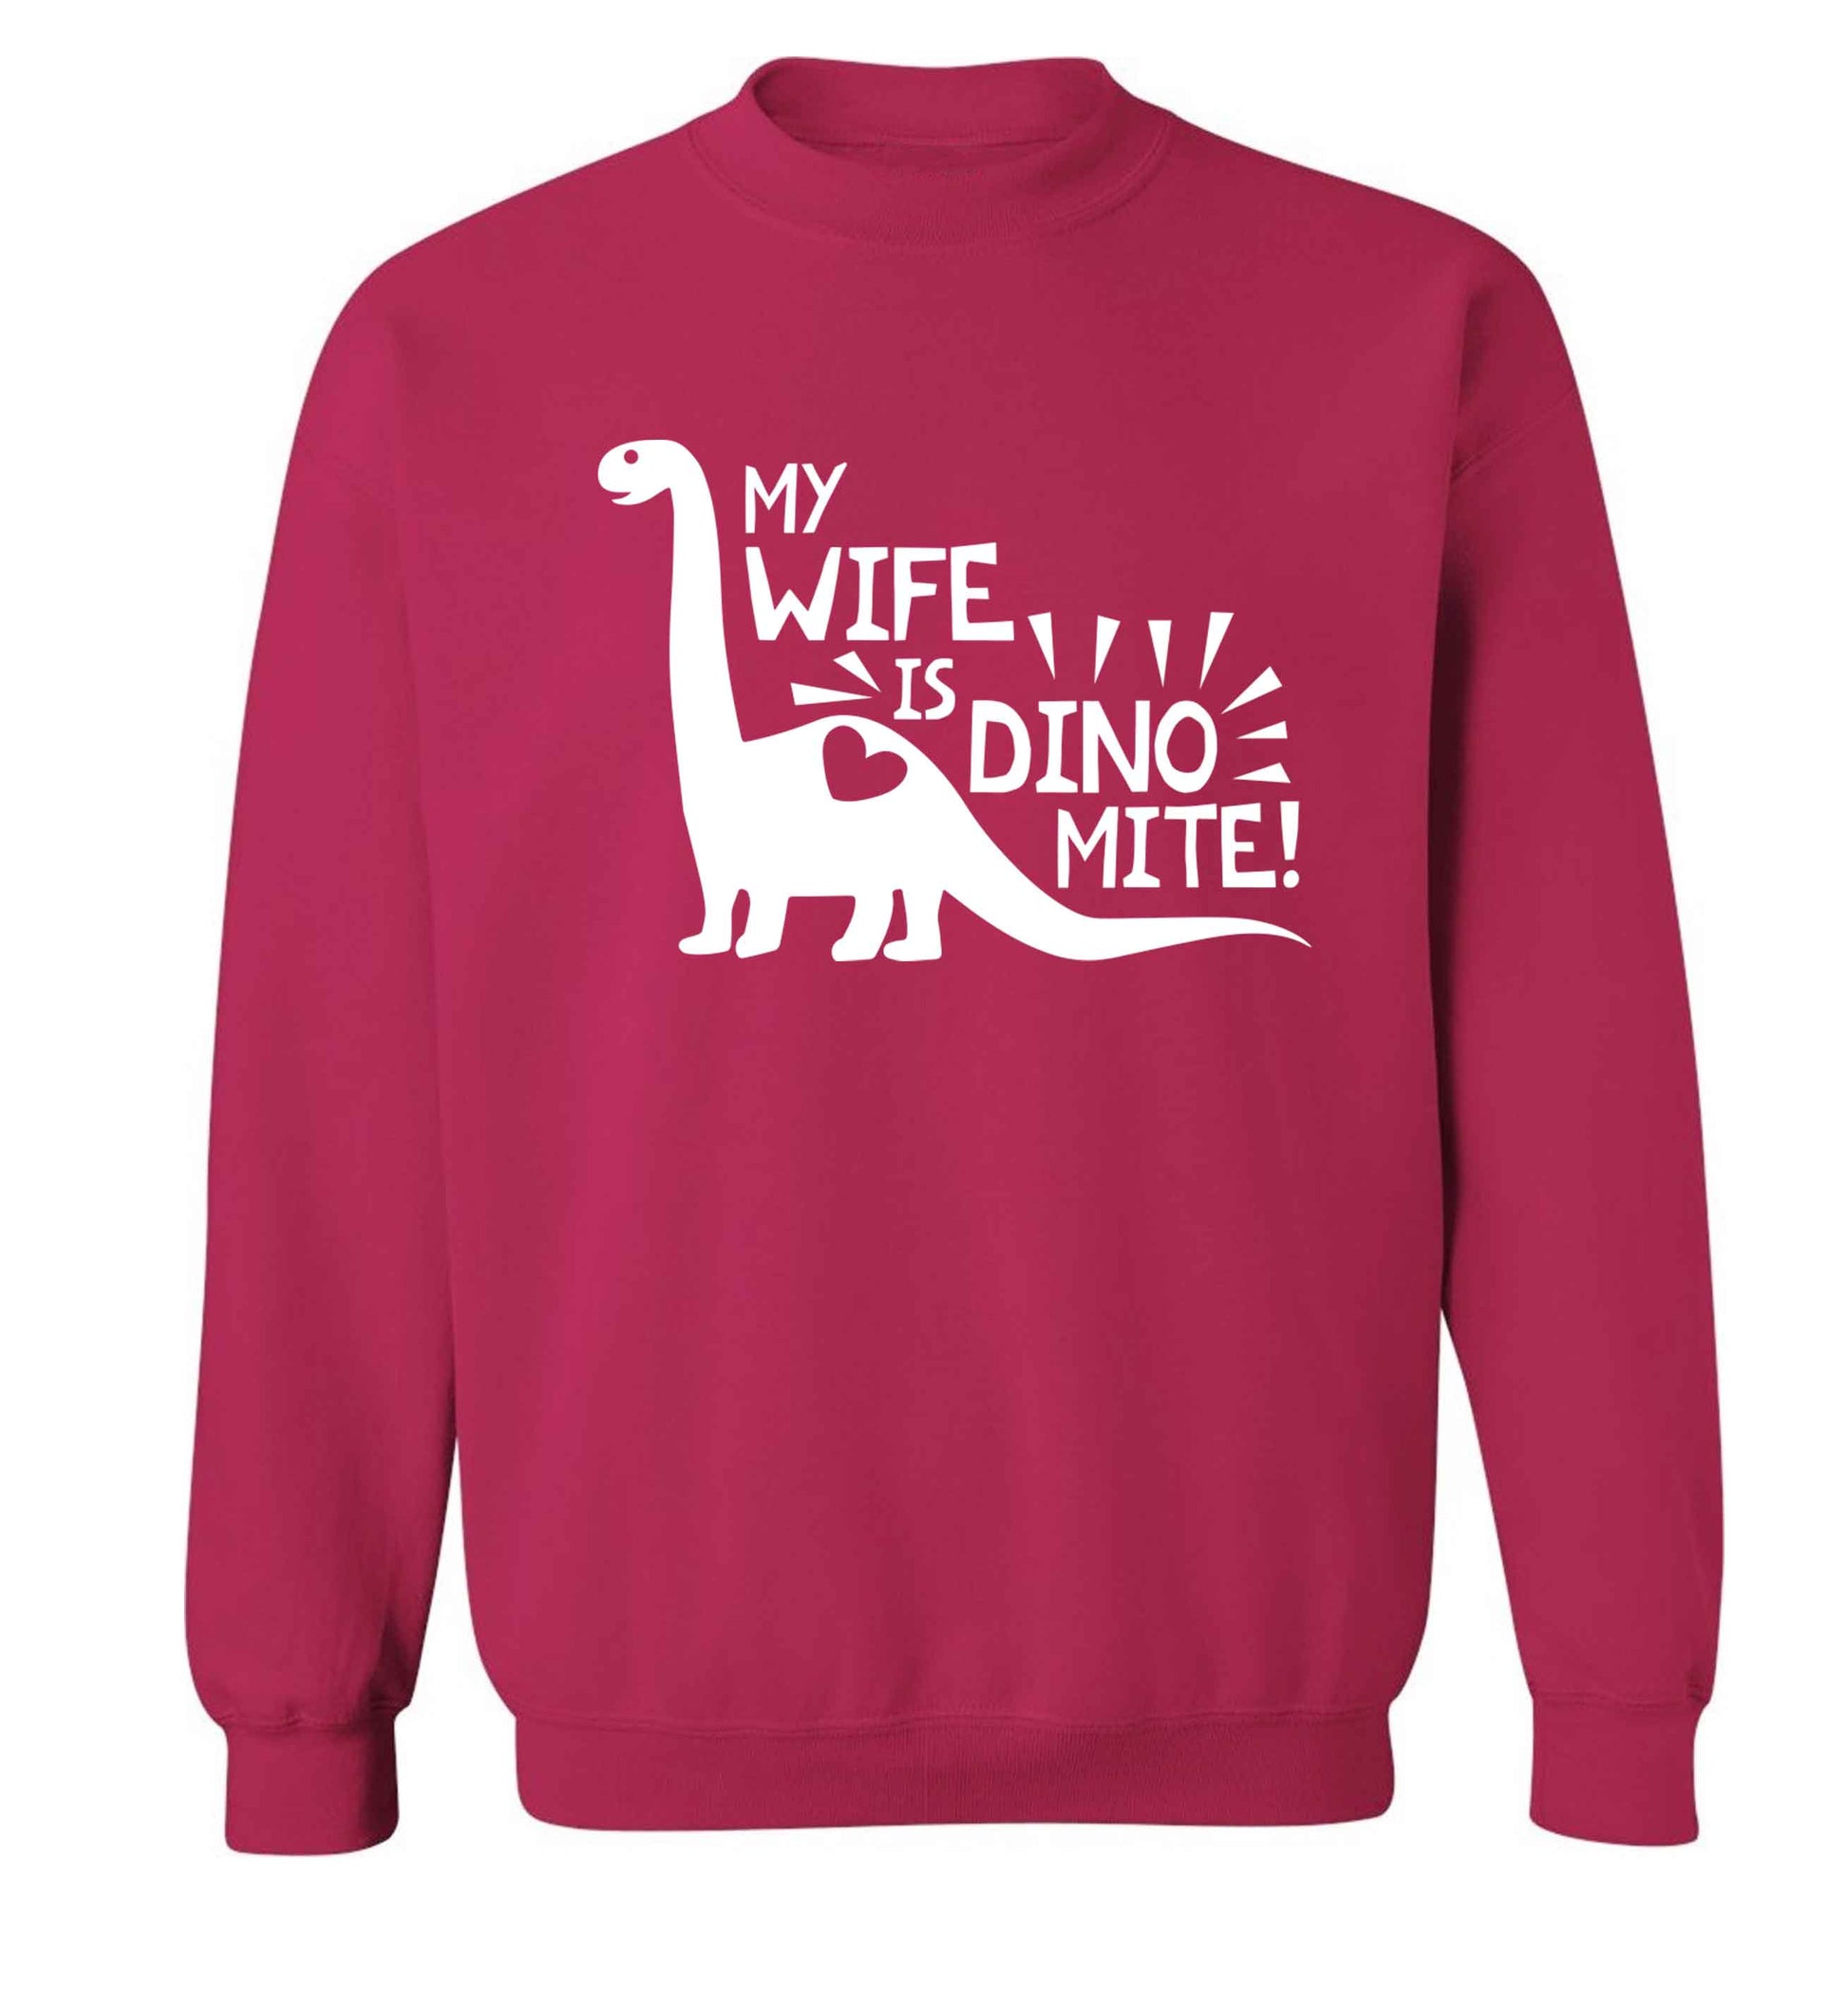 My wife is dinomite! Adult's unisex pink Sweater 2XL